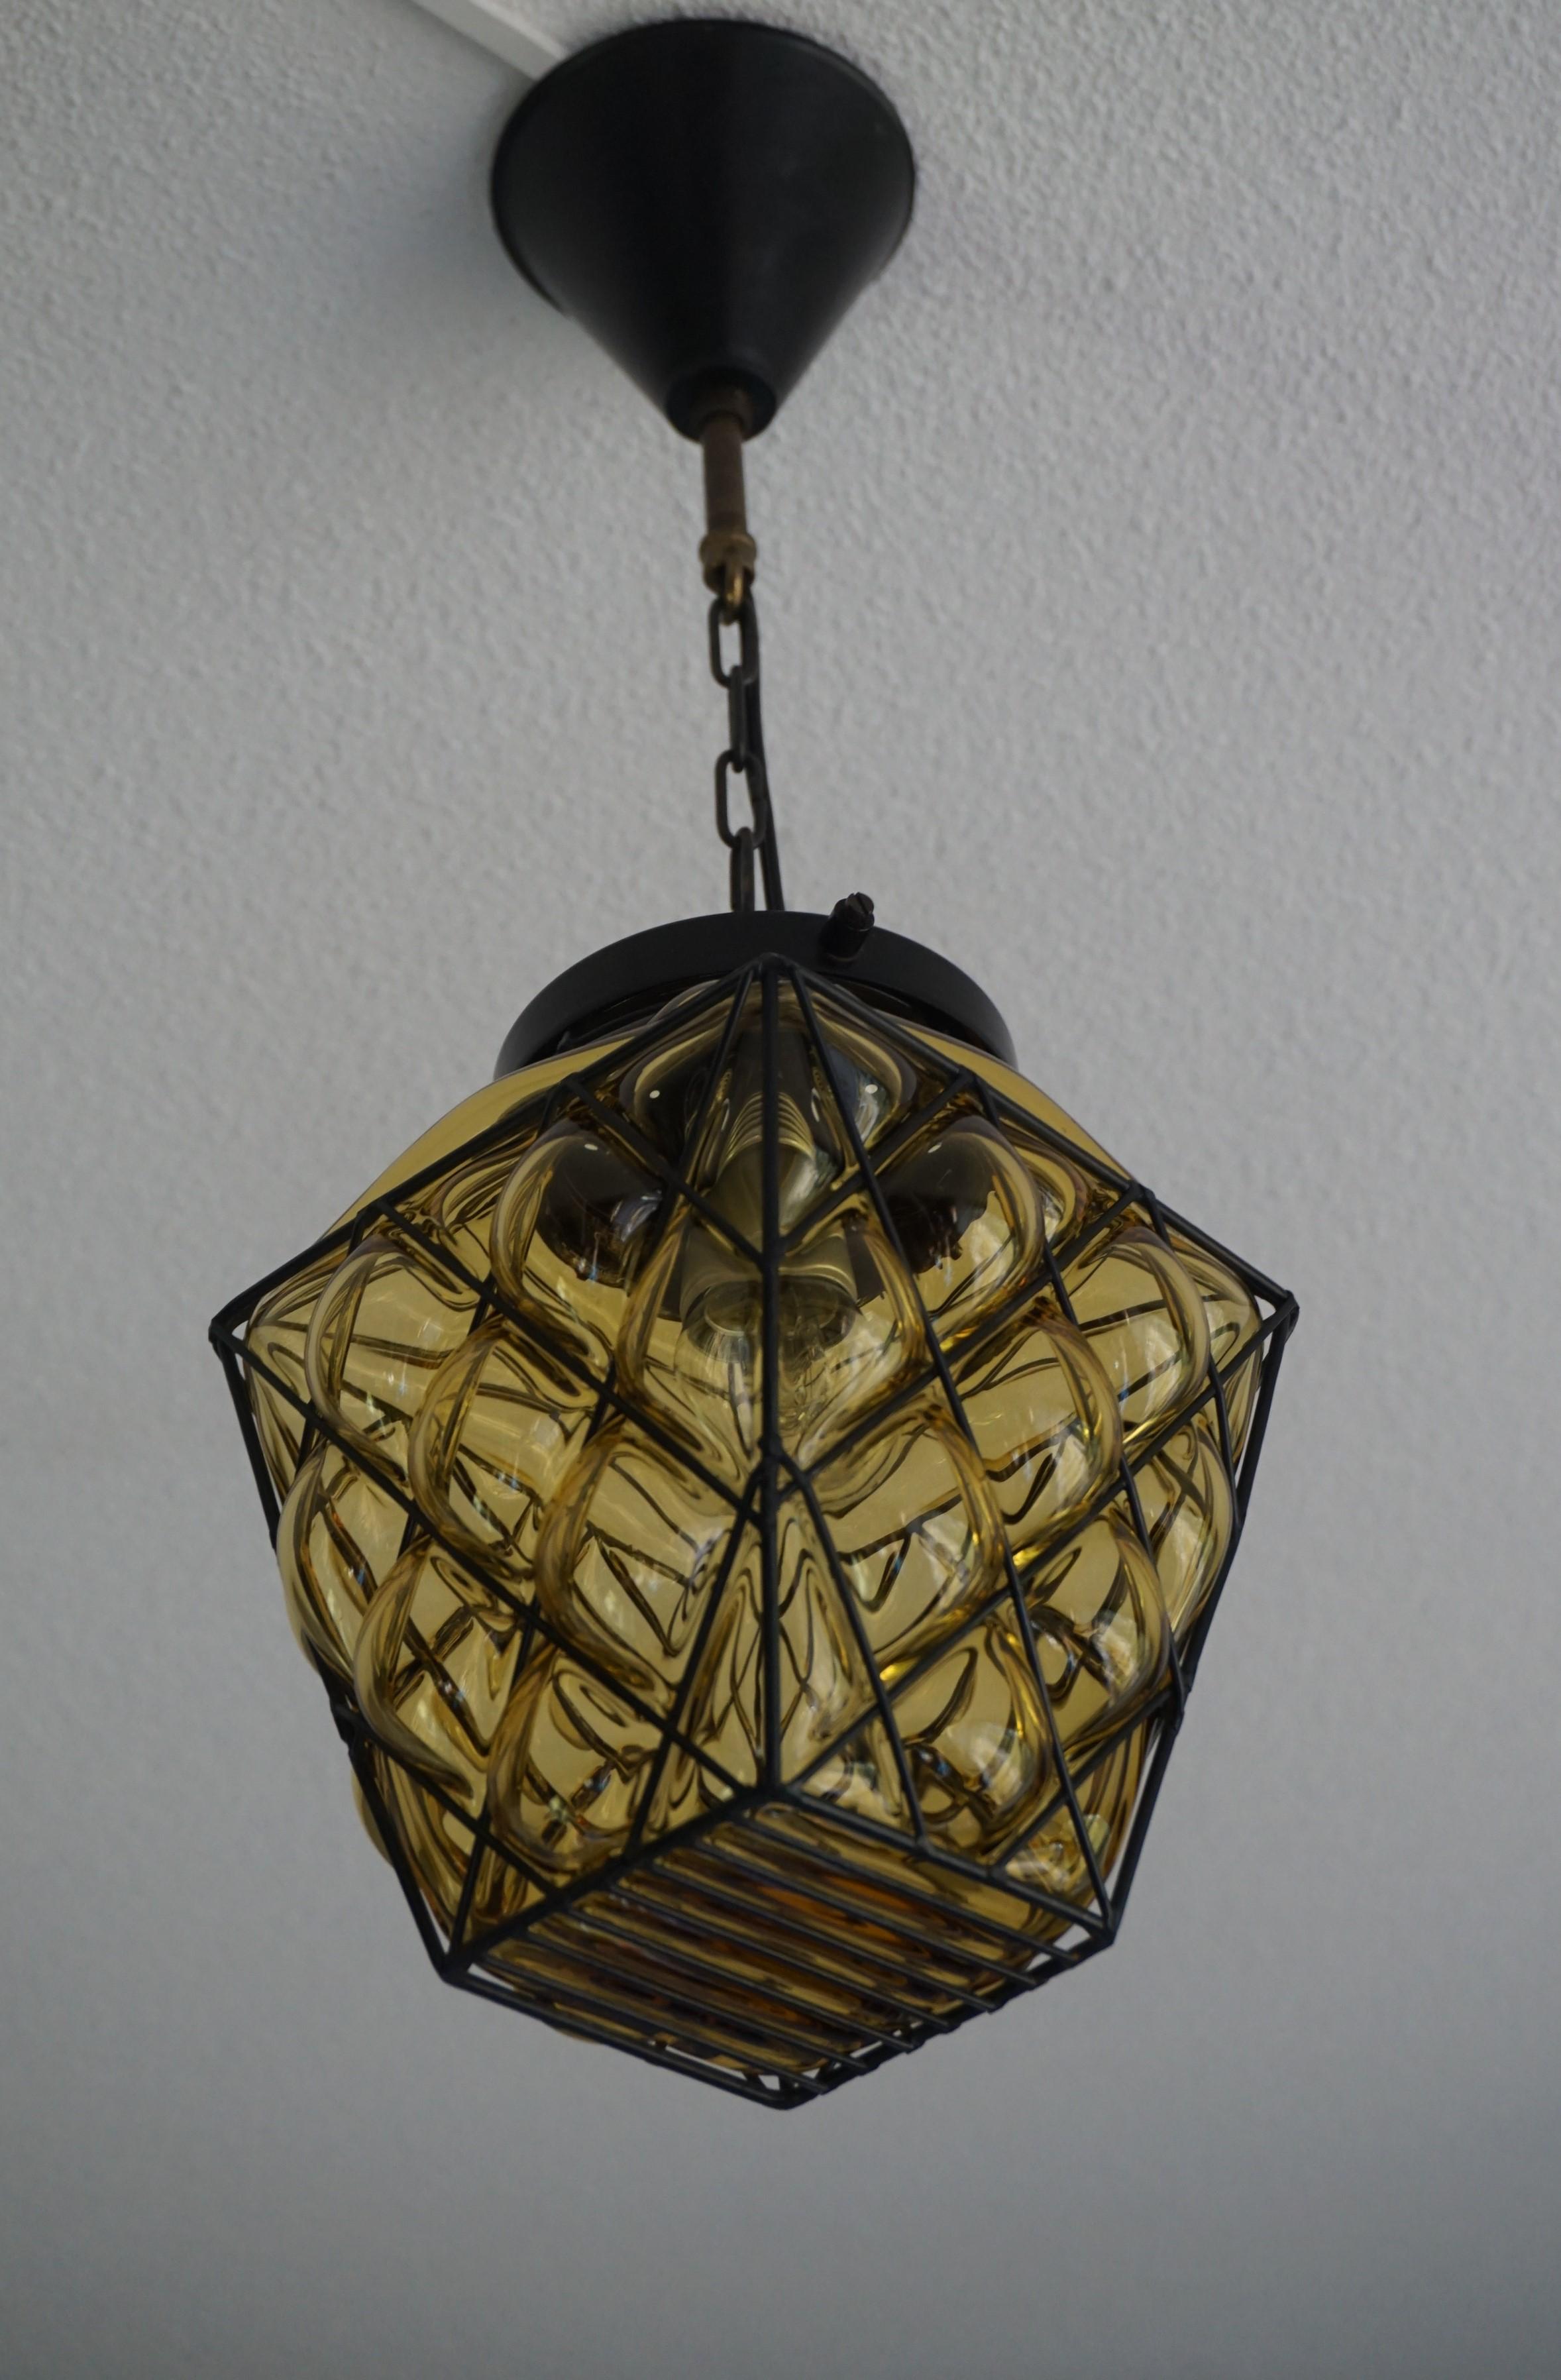 Perfect condition and wonderfully handcrafted, midcentury pendant.

This small and completely original, midcentury light fixture is ideal for usage in a small entrance, a small bedroom or a private restroom. The wonderful, amber colored glass is